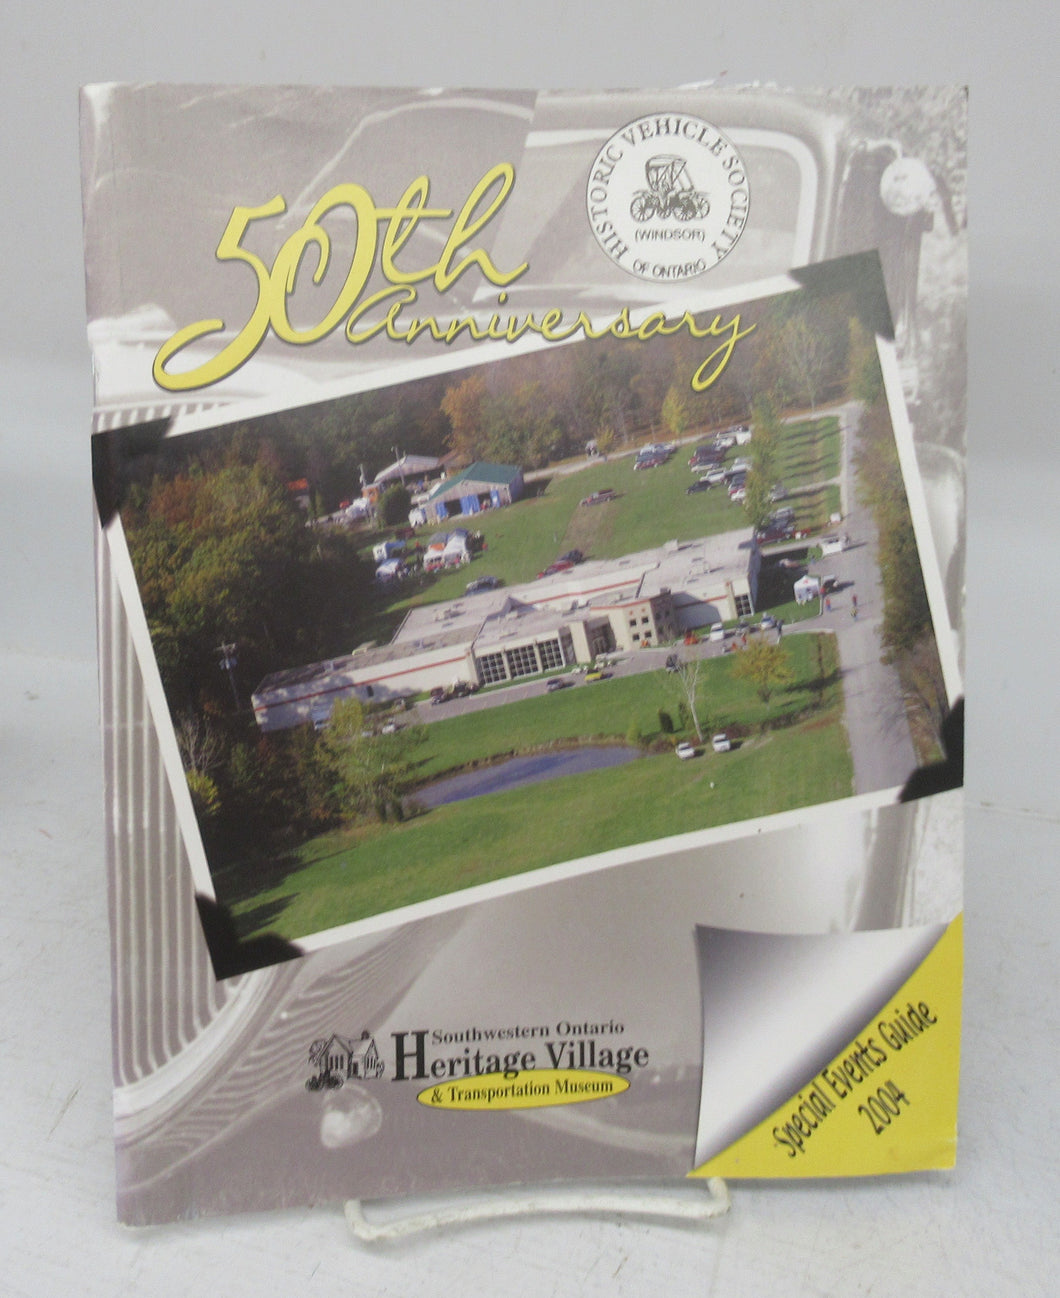 Southwestern Ontario Heritage Village & Transportation Museum 50th Anniversary Special Events Guide 2004